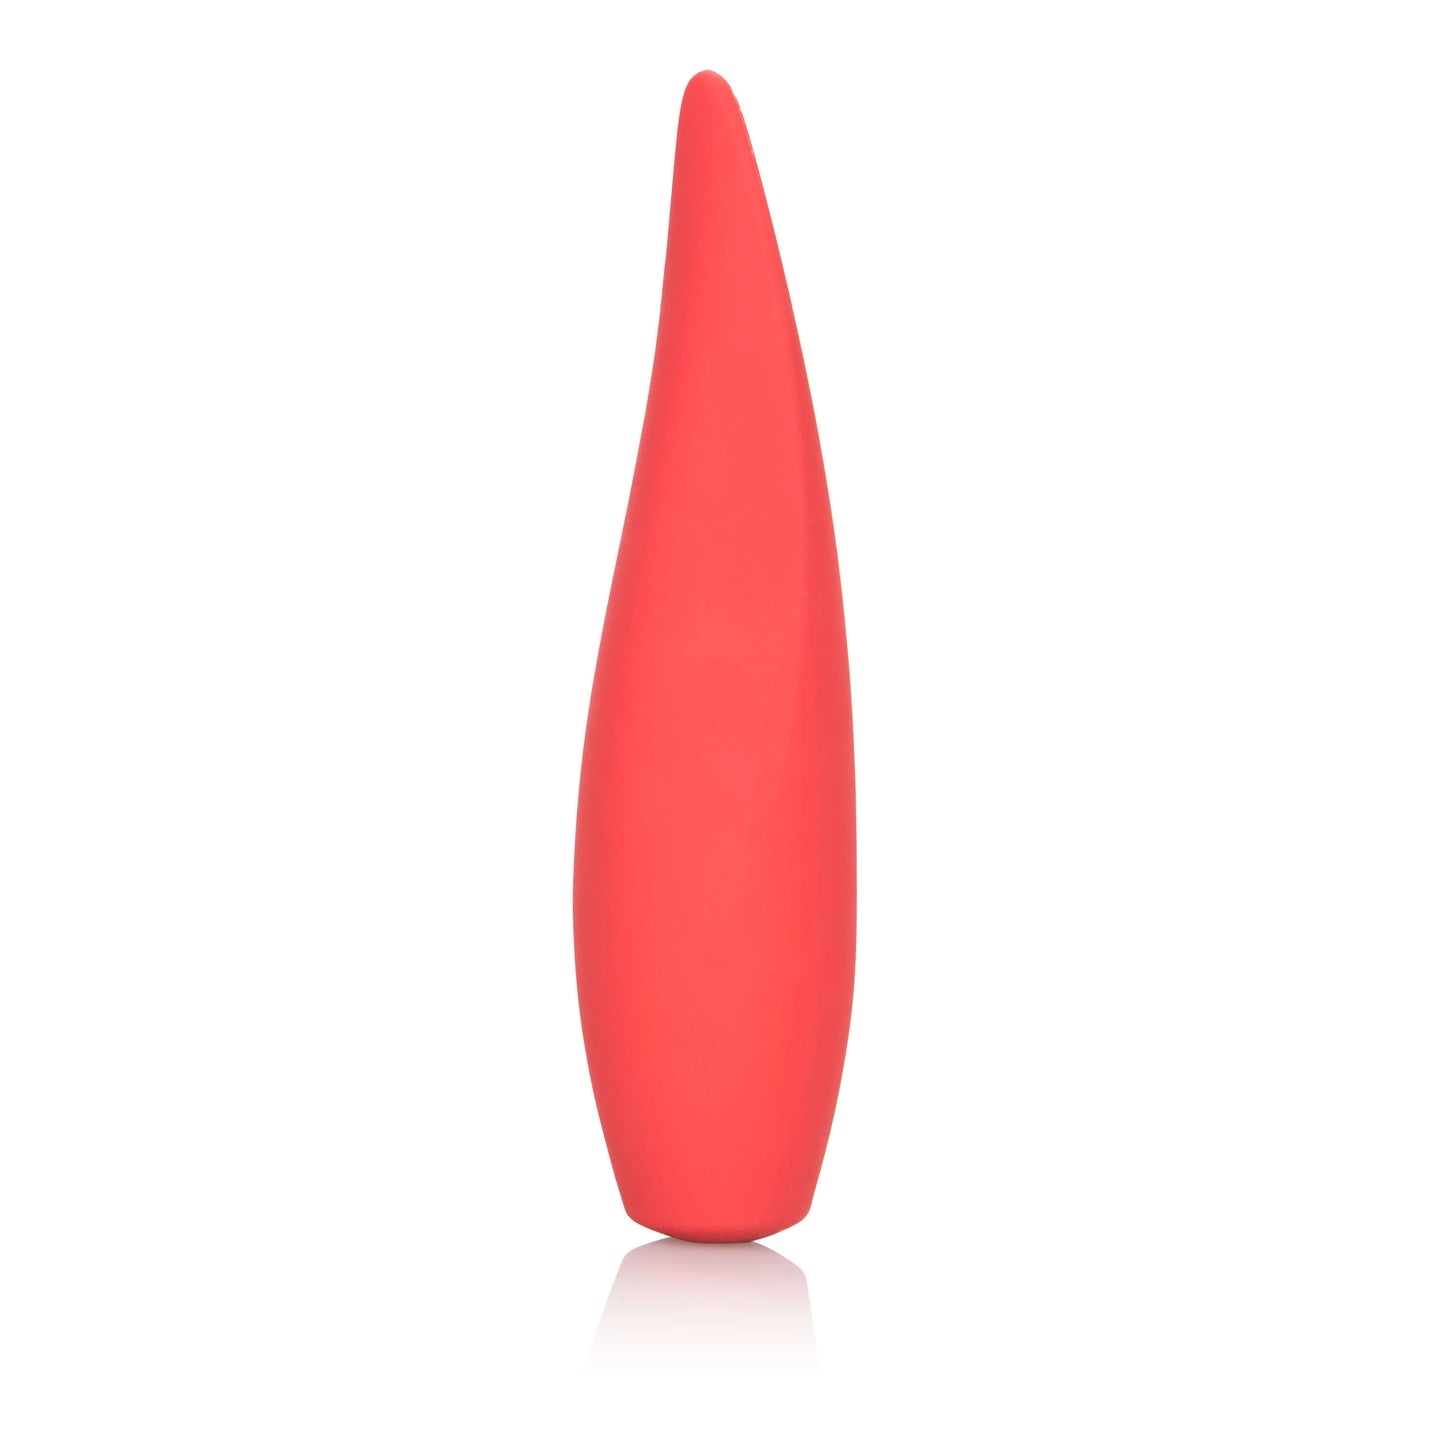 Red Hot Ember - CalExotics - by The Bigger O an online sex toy shop. We ship to USA, Canada and the UK.